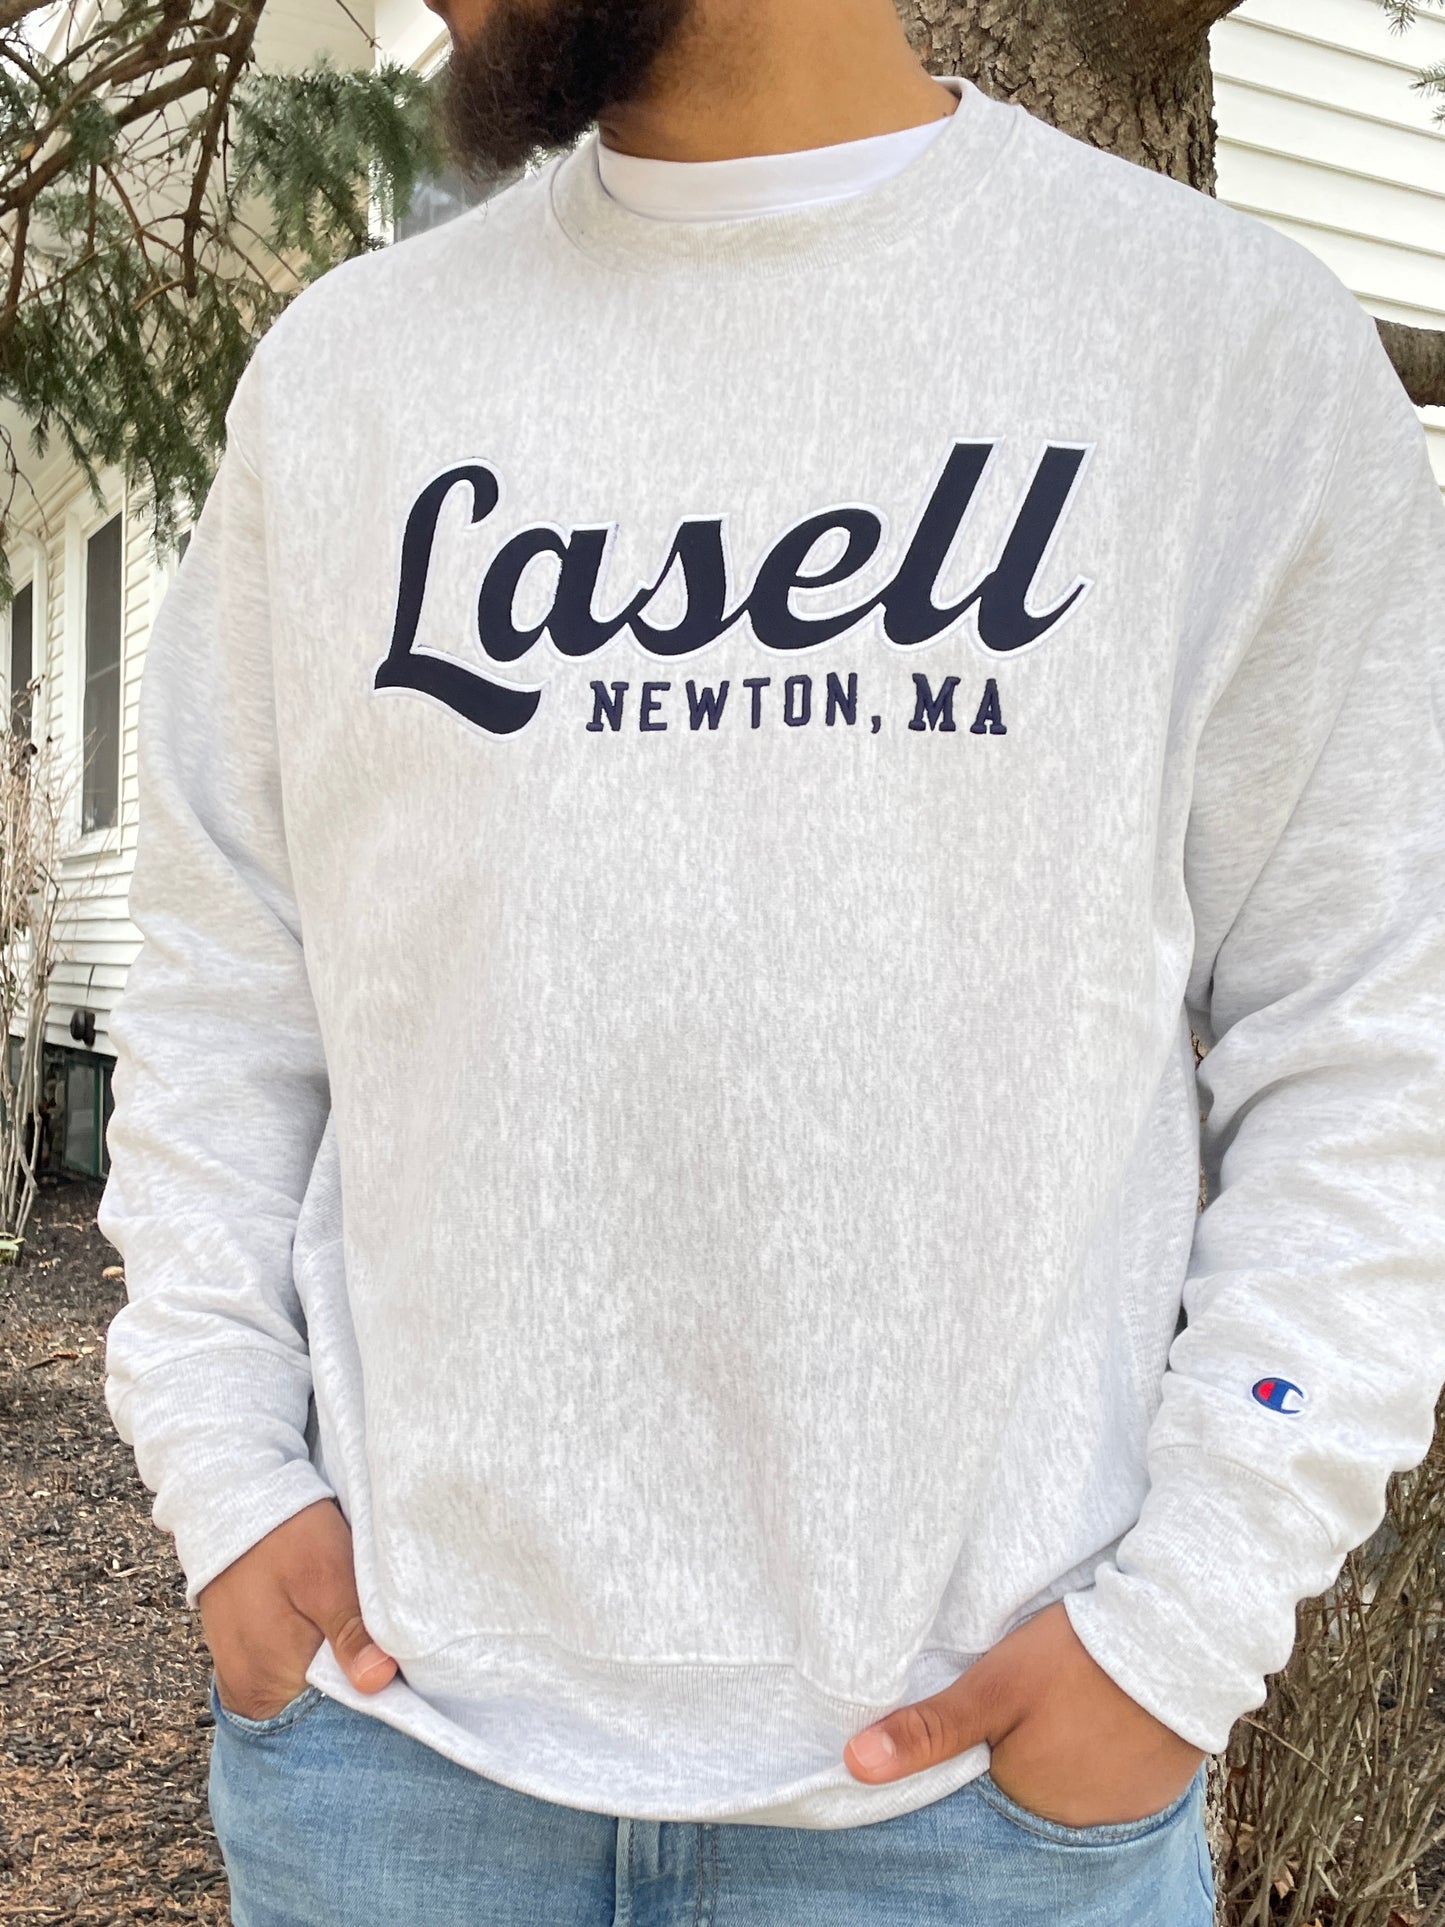 Lasell Newton MA-Heather Gray & Navy Embroidery